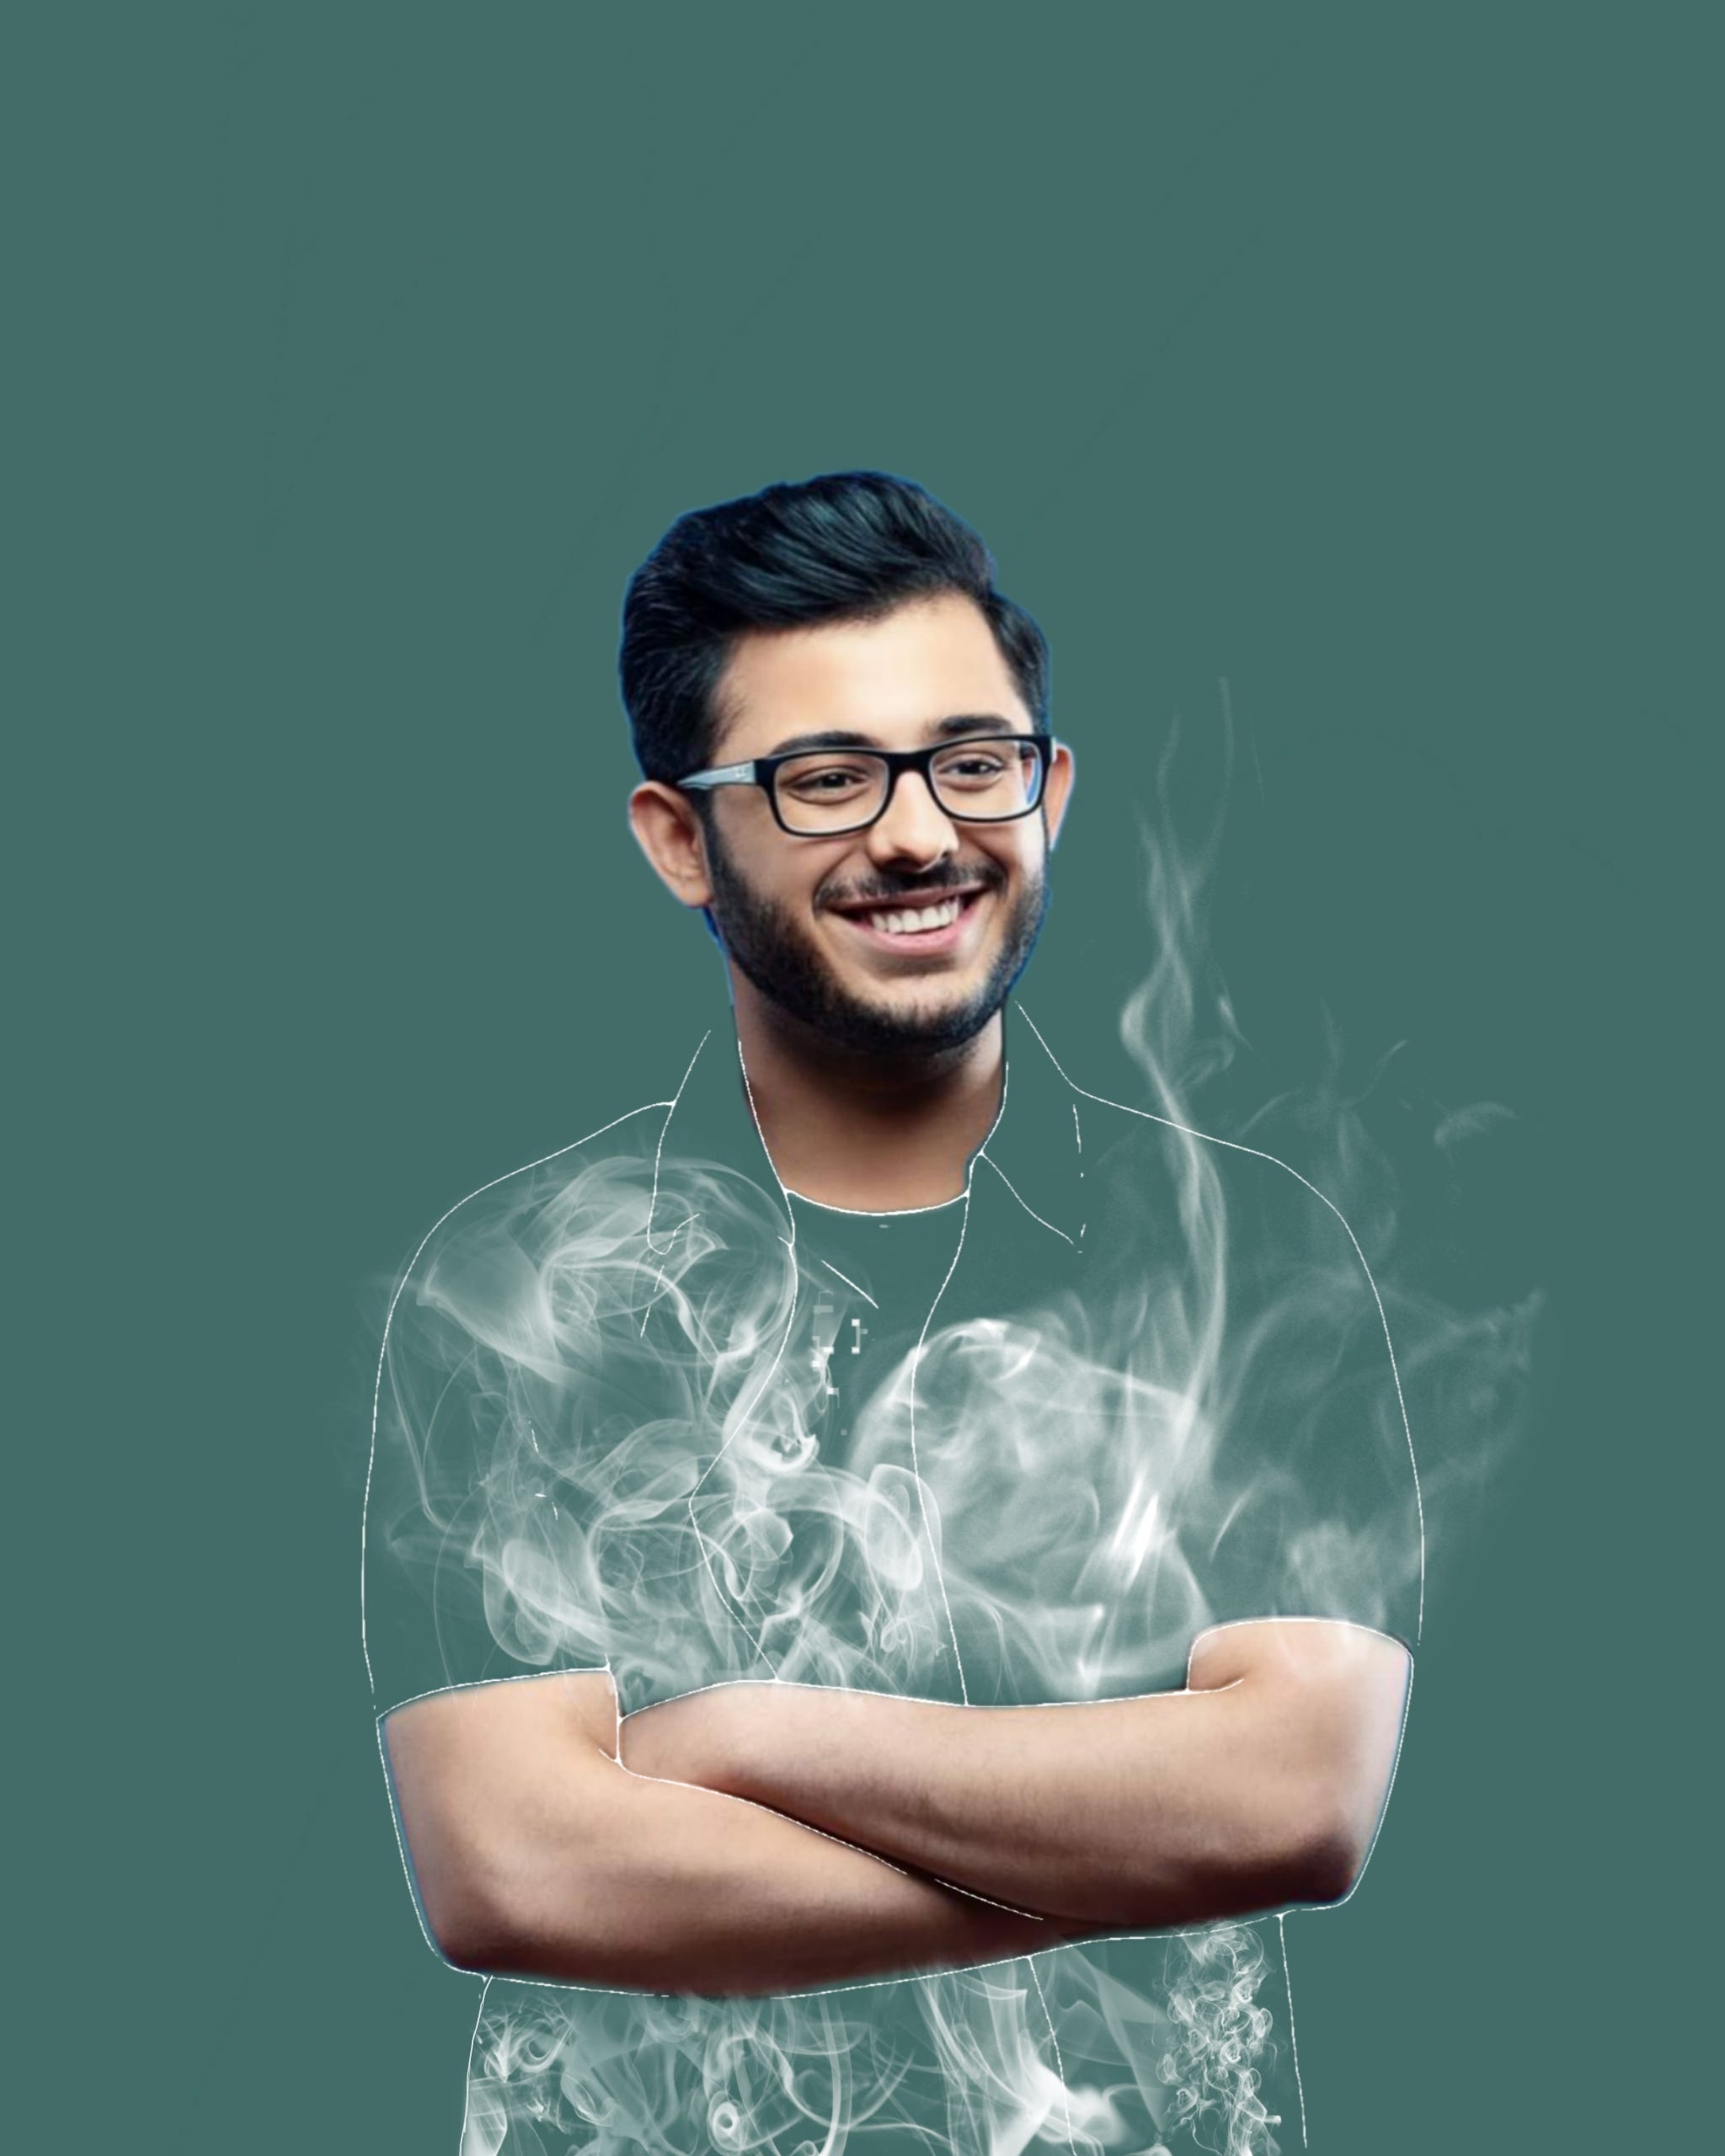 Download Individual Smoke Effect Editing Background Png Download By Tiger Editing Zone Medium 3D SVG Files Ideas | SVG, Paper Crafts, SVG File